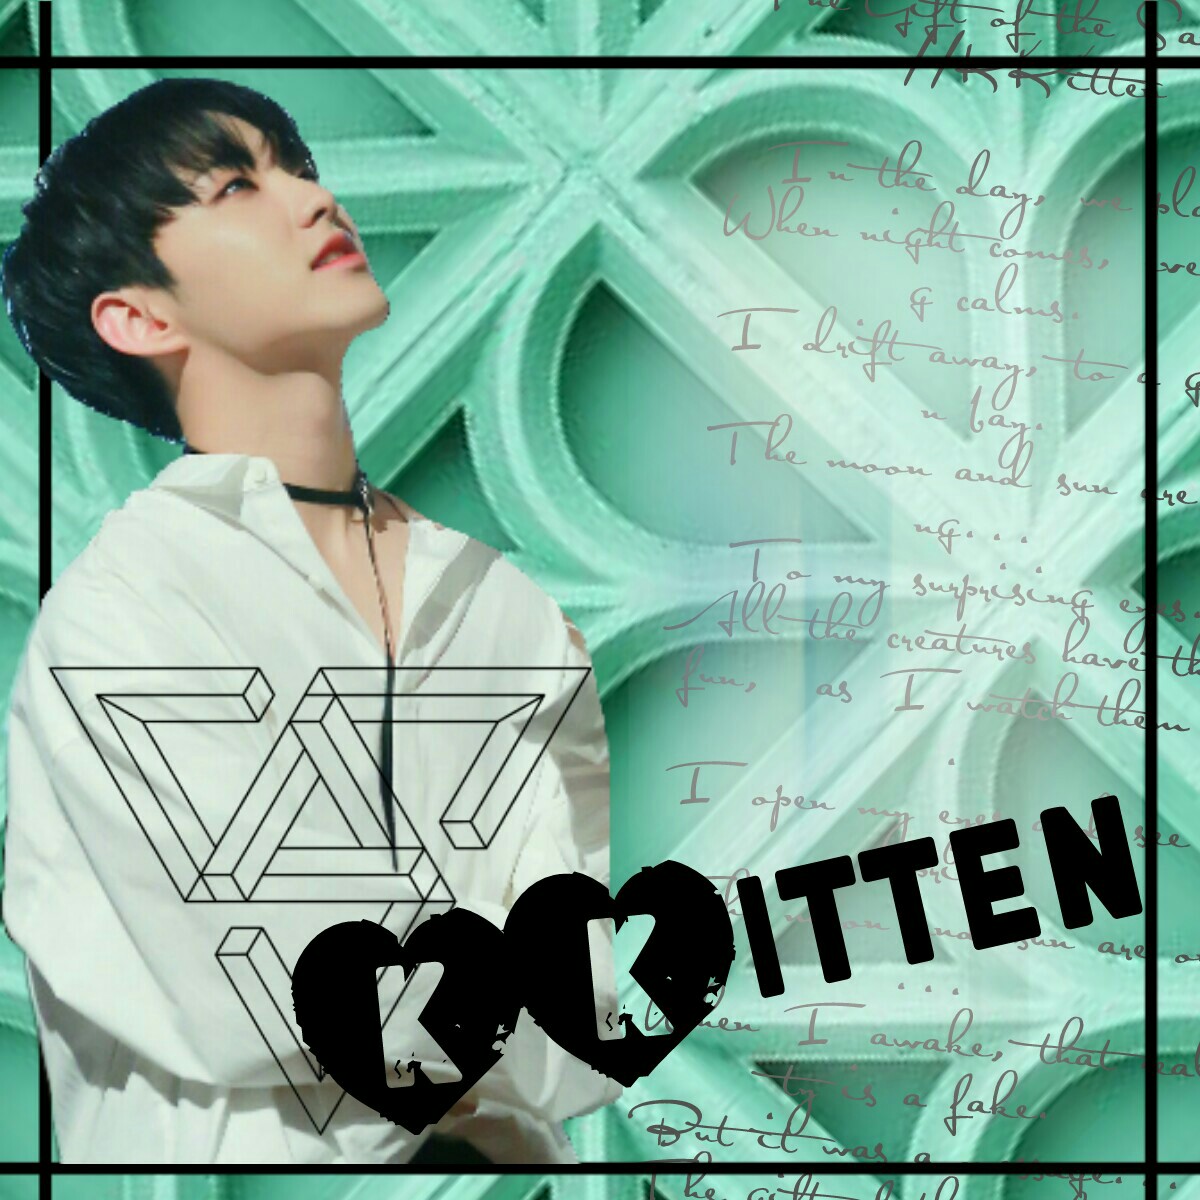 Hoshi edit cause why not? Done on PicCollage, yes! And the text is a poem type thing of my own.